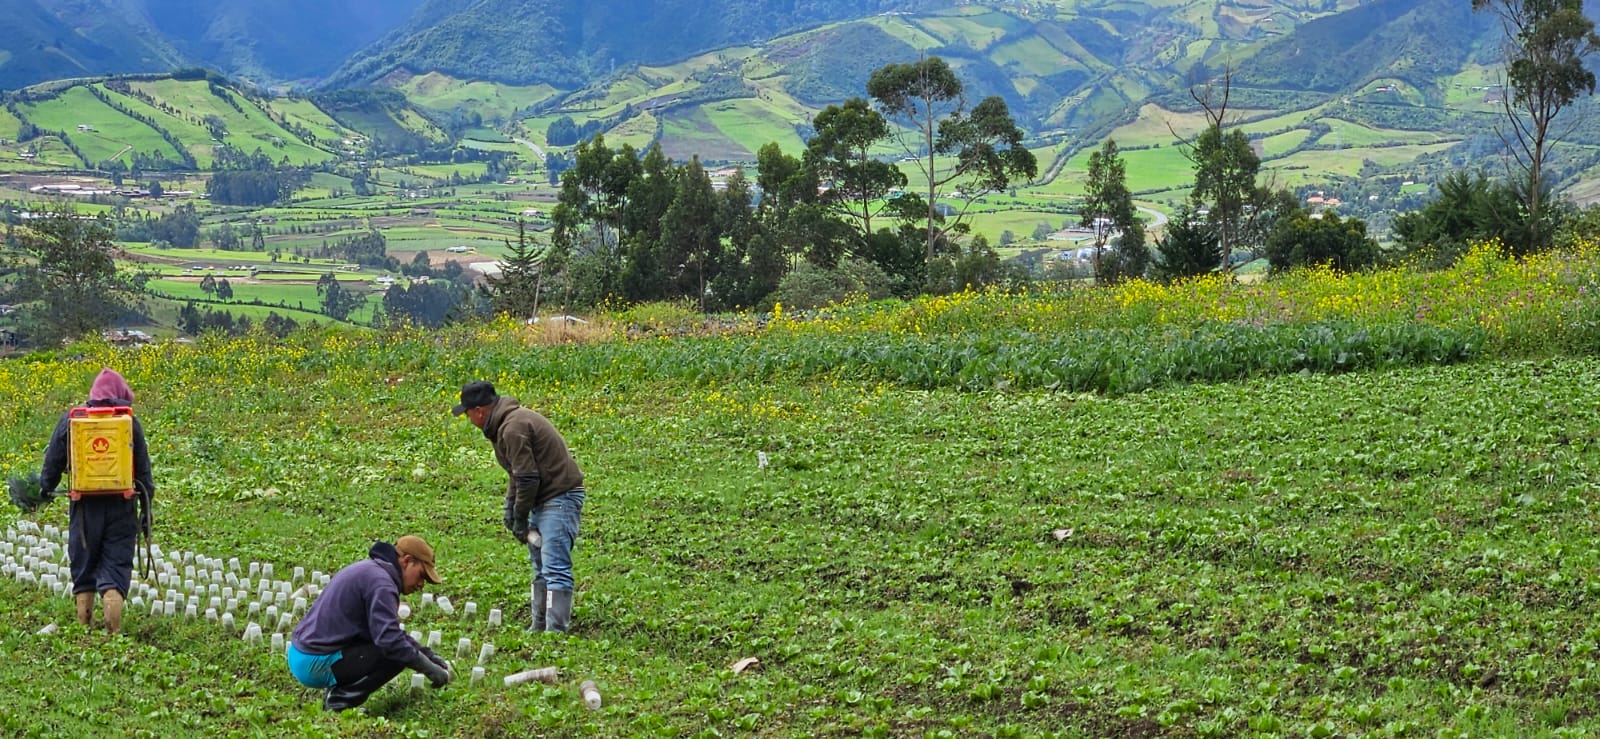 Intensive agriculture in the outskirts of the city Pasto in Nariño Centro